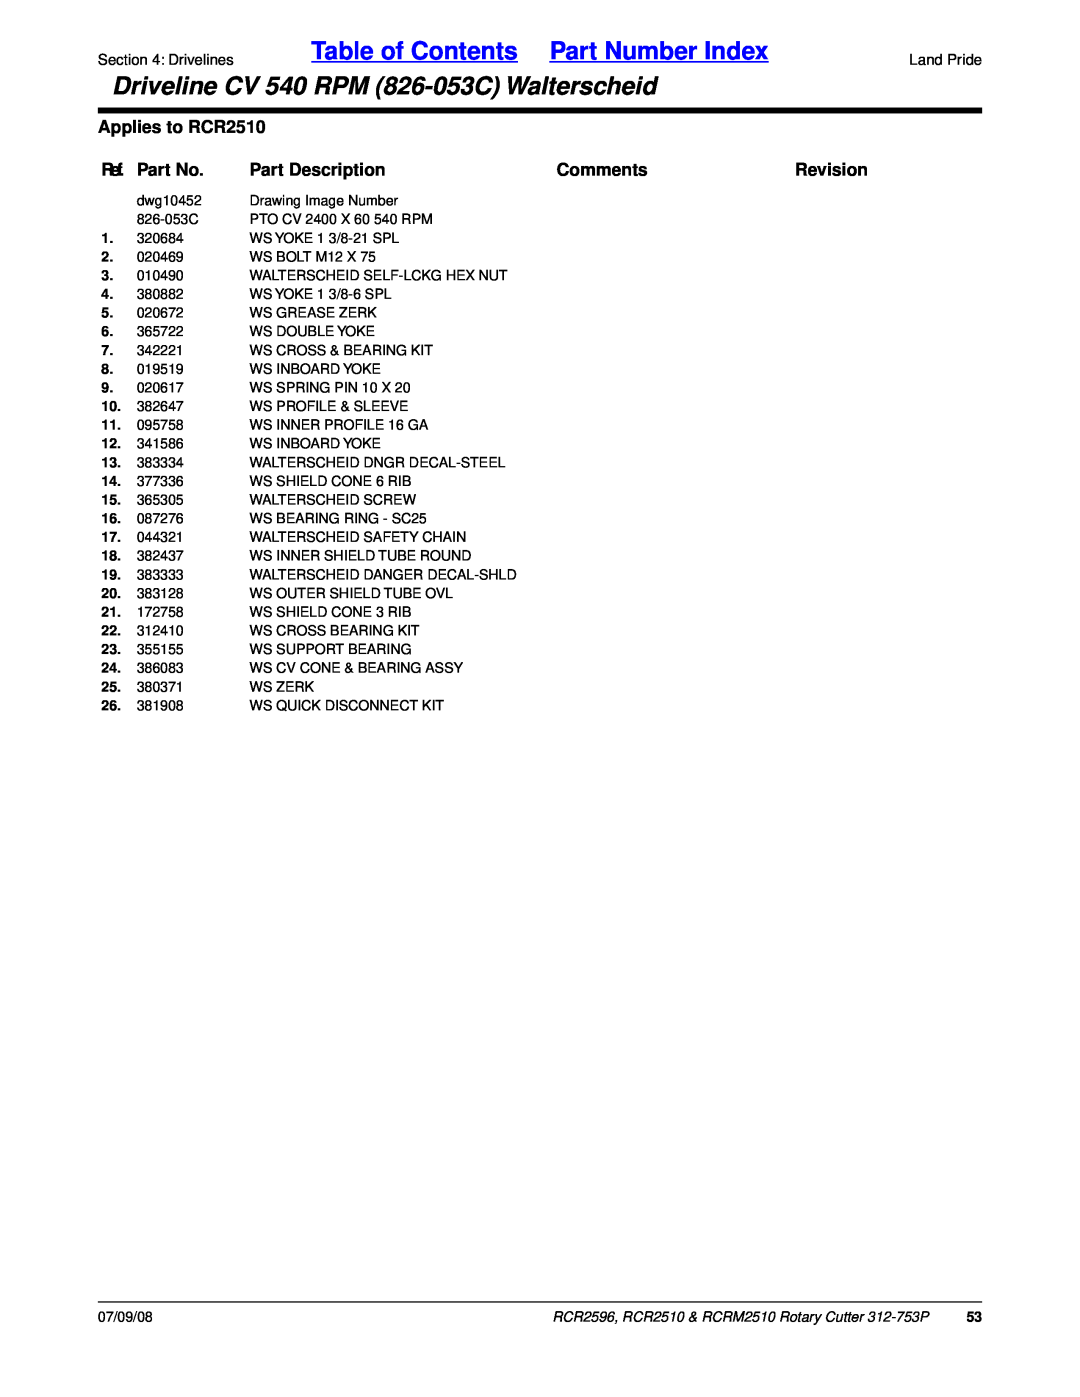 Land Pride Table of Contents Part Number Index, Driveline CV 540 RPM 826-053CWalterscheid, Applies to RCR2510, Comments 